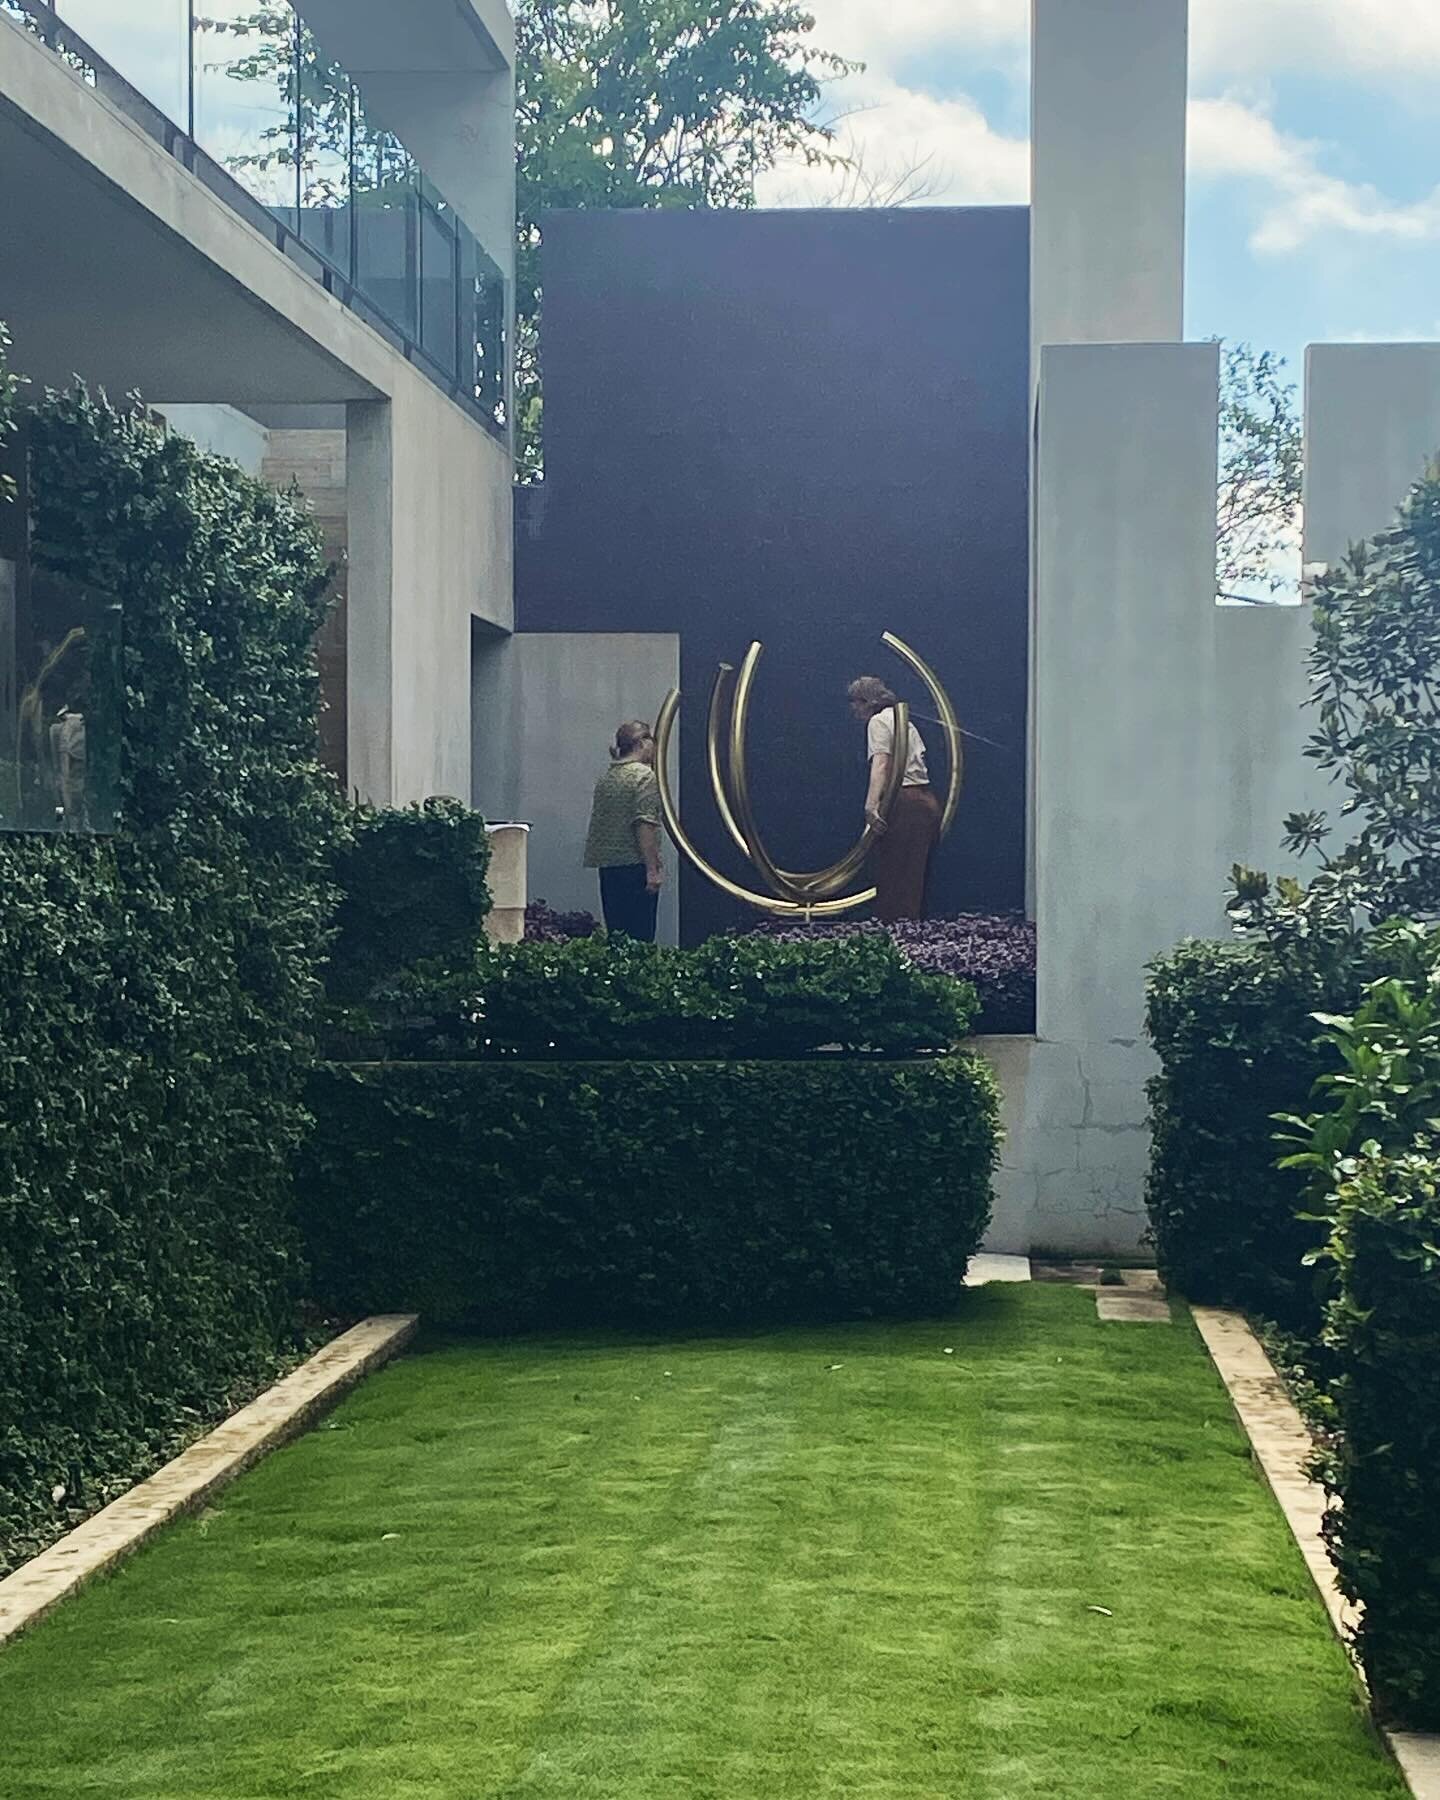 Exciting morning at N House with the installation of a new (and large!) @varendorff garden sculpture for @shayoharasmith 

@partnershill 
@hoggandlamb 
@danyoungla 
@soddesign